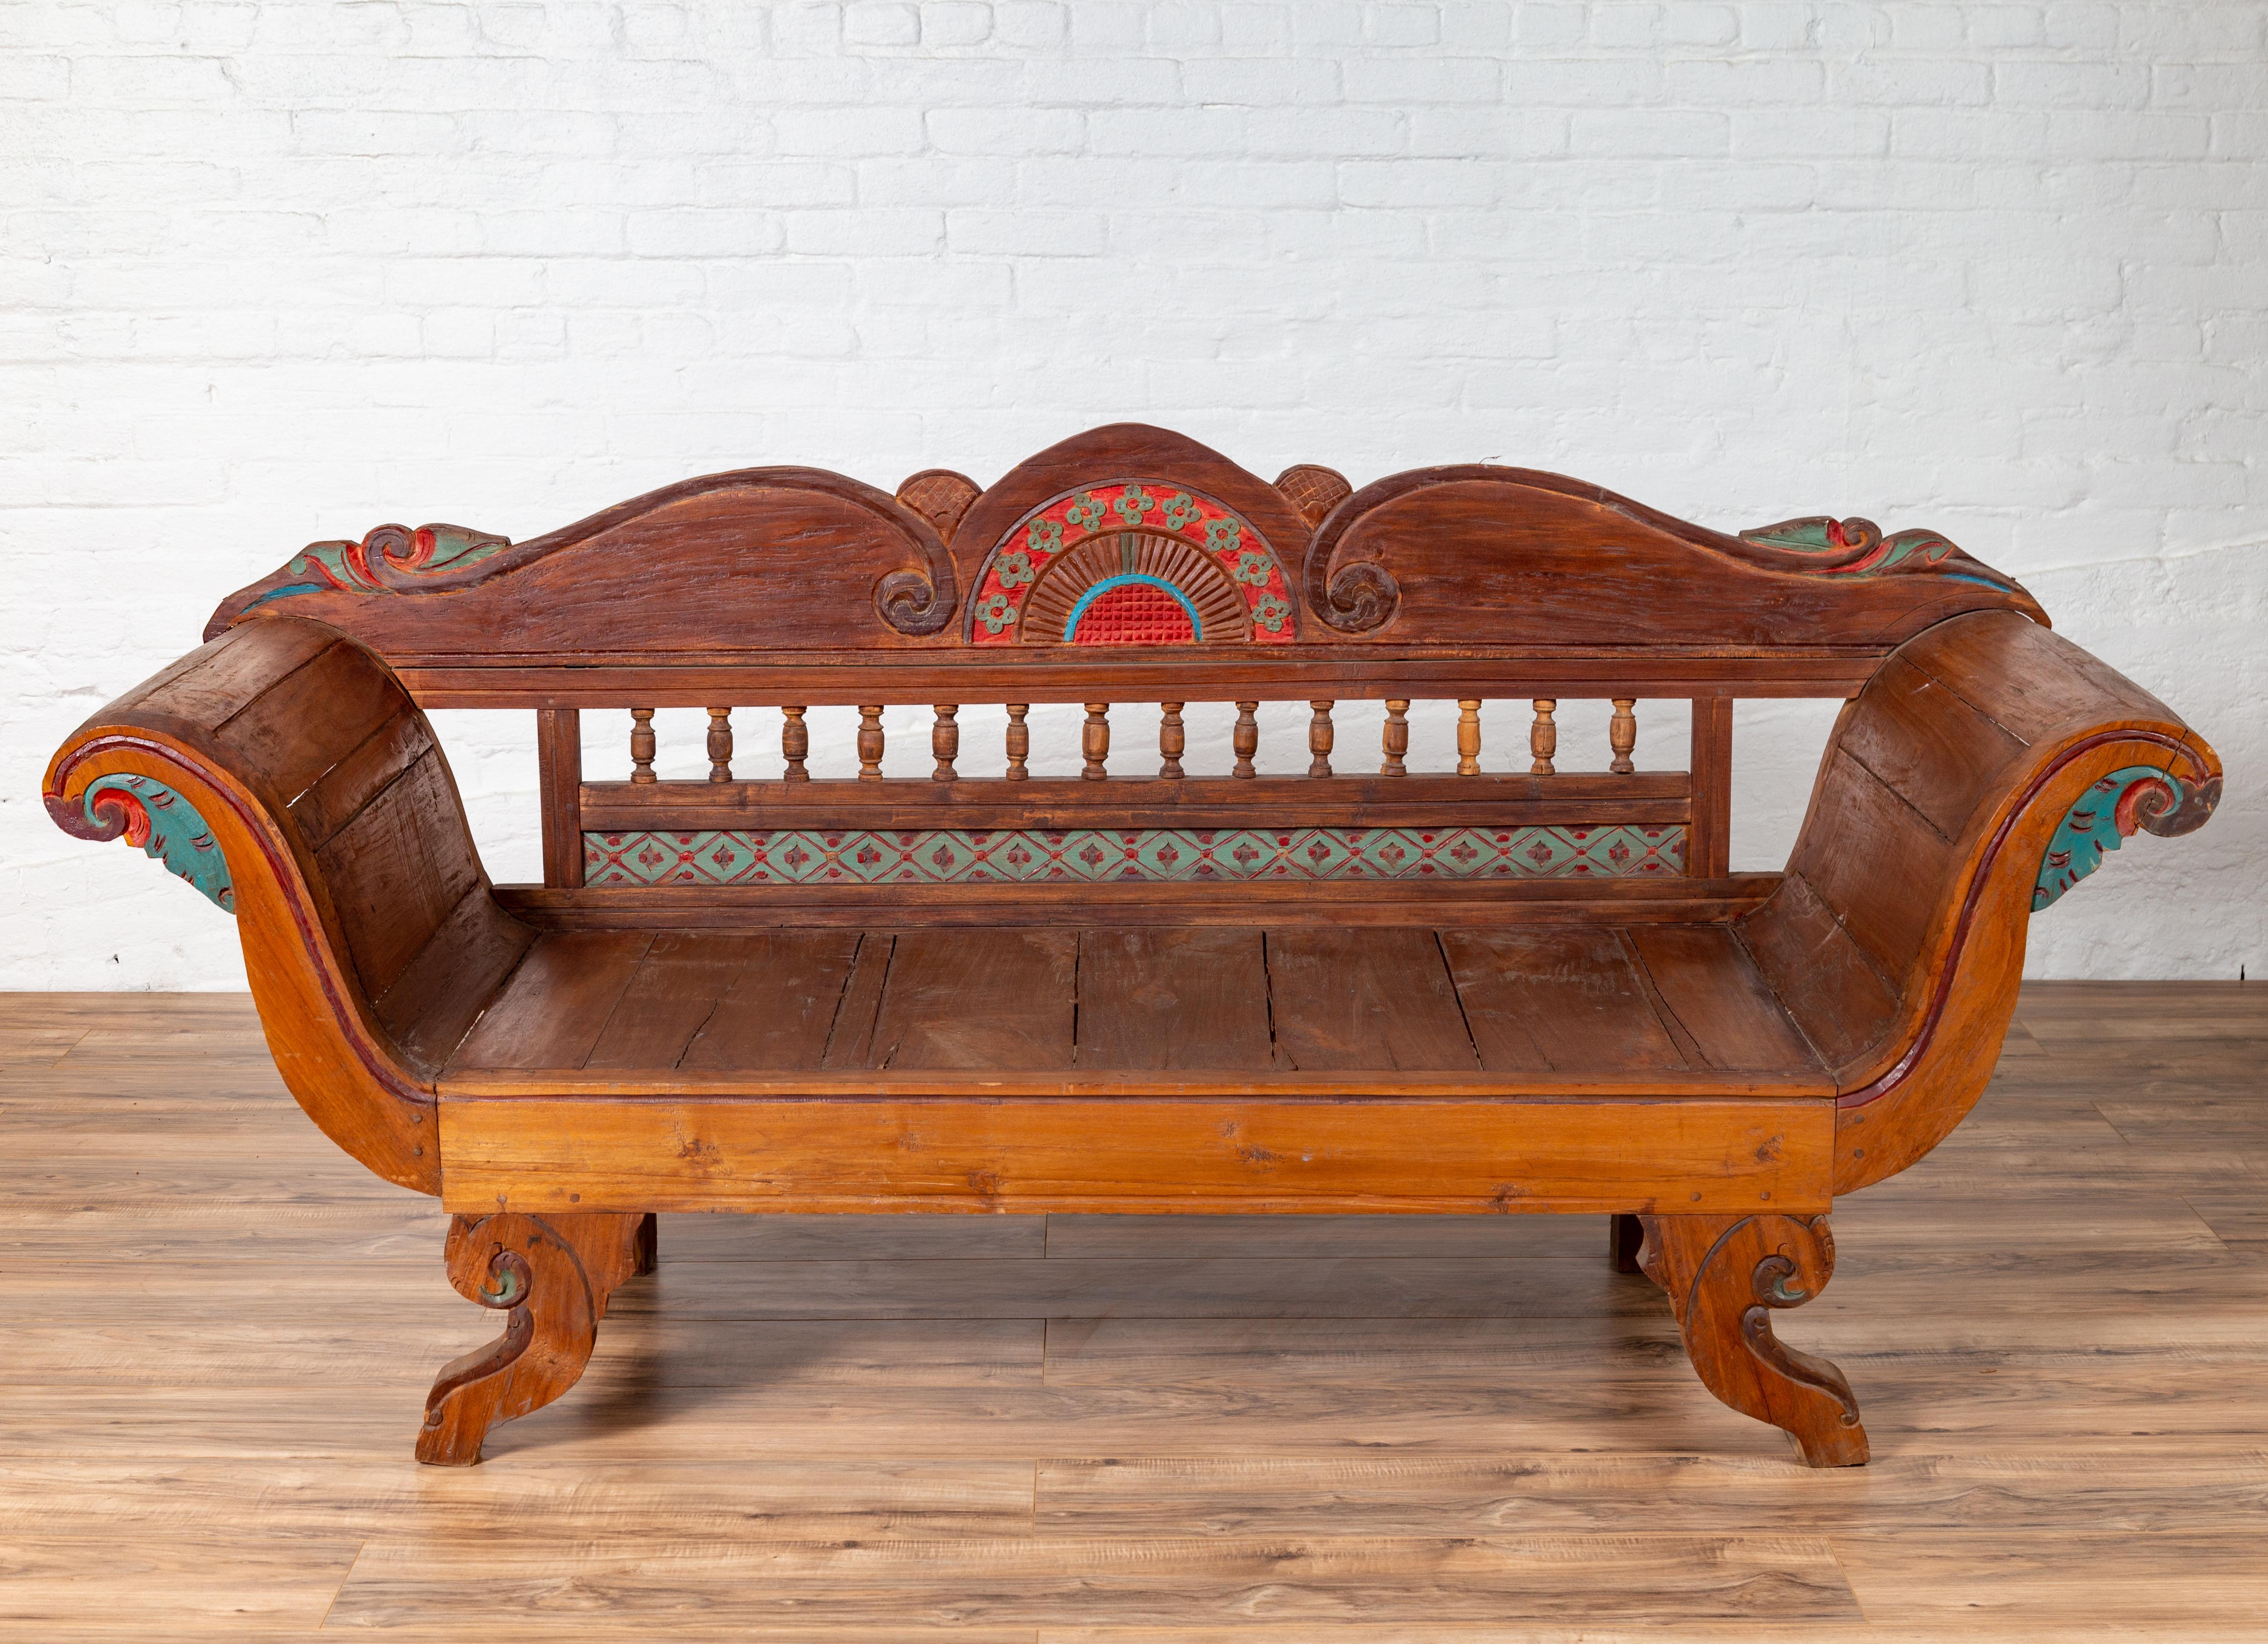 Plantation Javanese Teak Settee with Polychrome Décor and Out-Scrolling Arms In Good Condition For Sale In Yonkers, NY